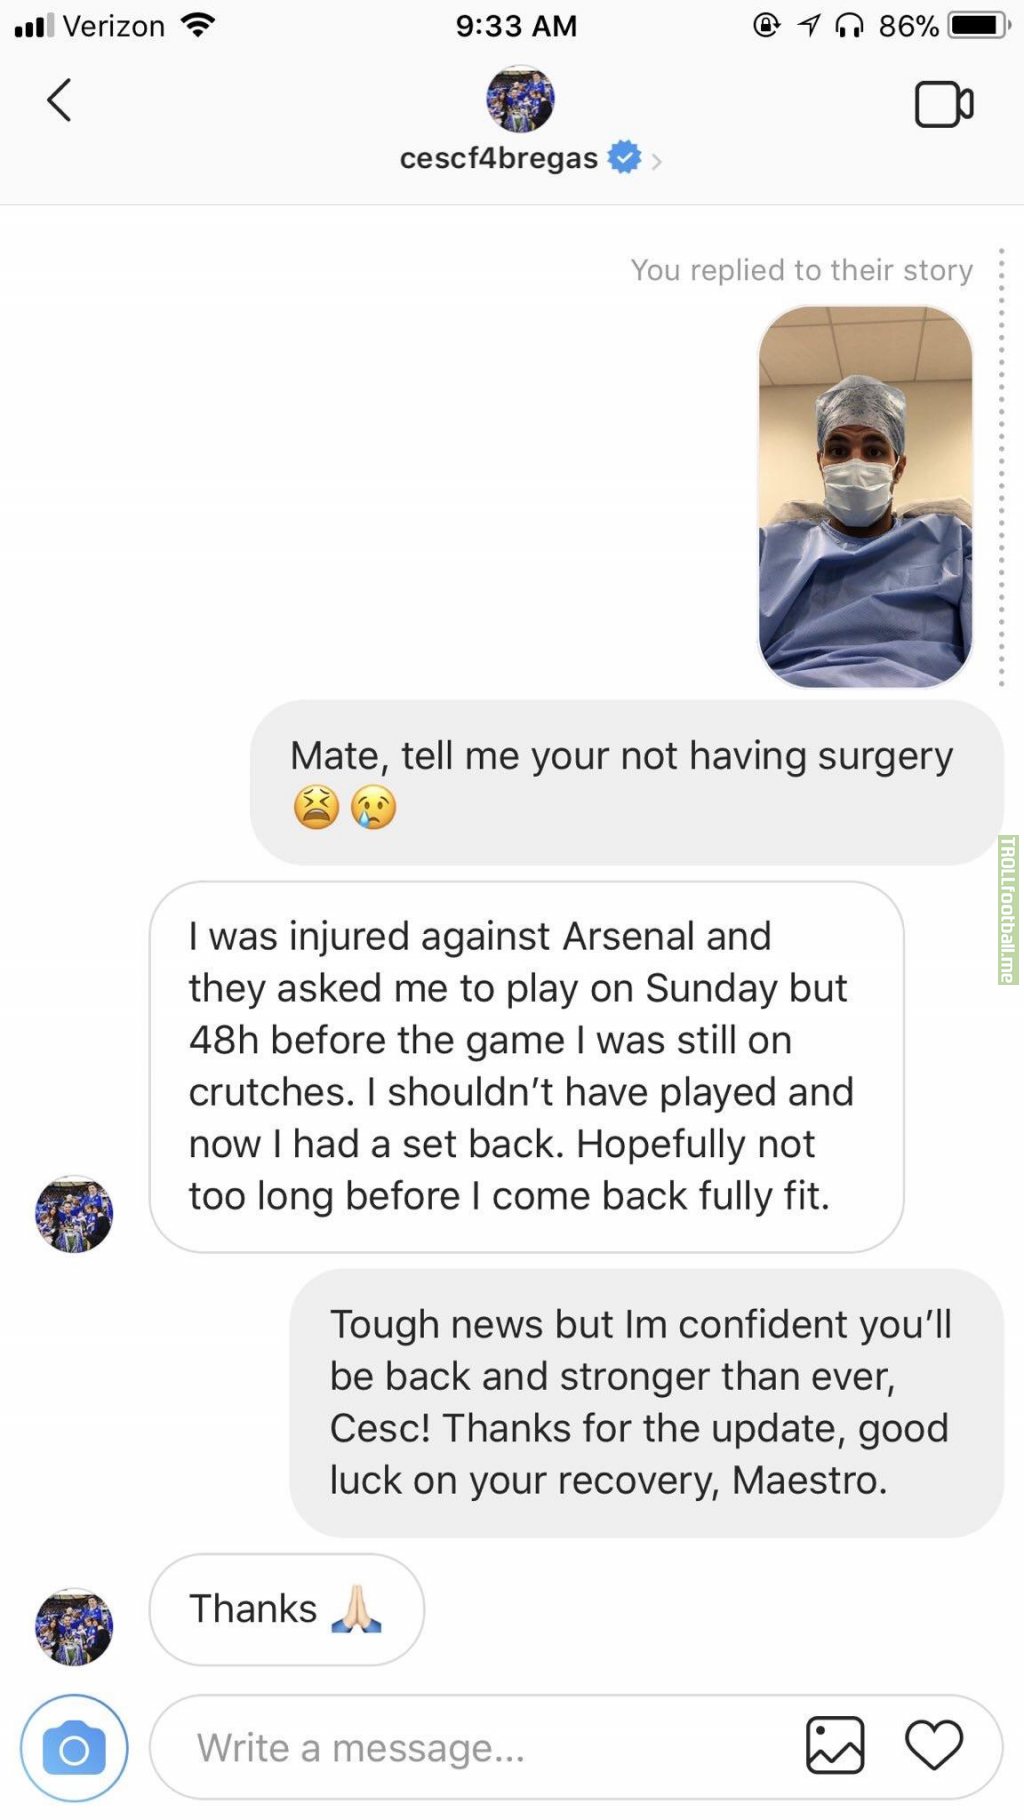 Cesc Fabregas confirms he was injured for the community shield game and is now out for the game against Huddersfield.